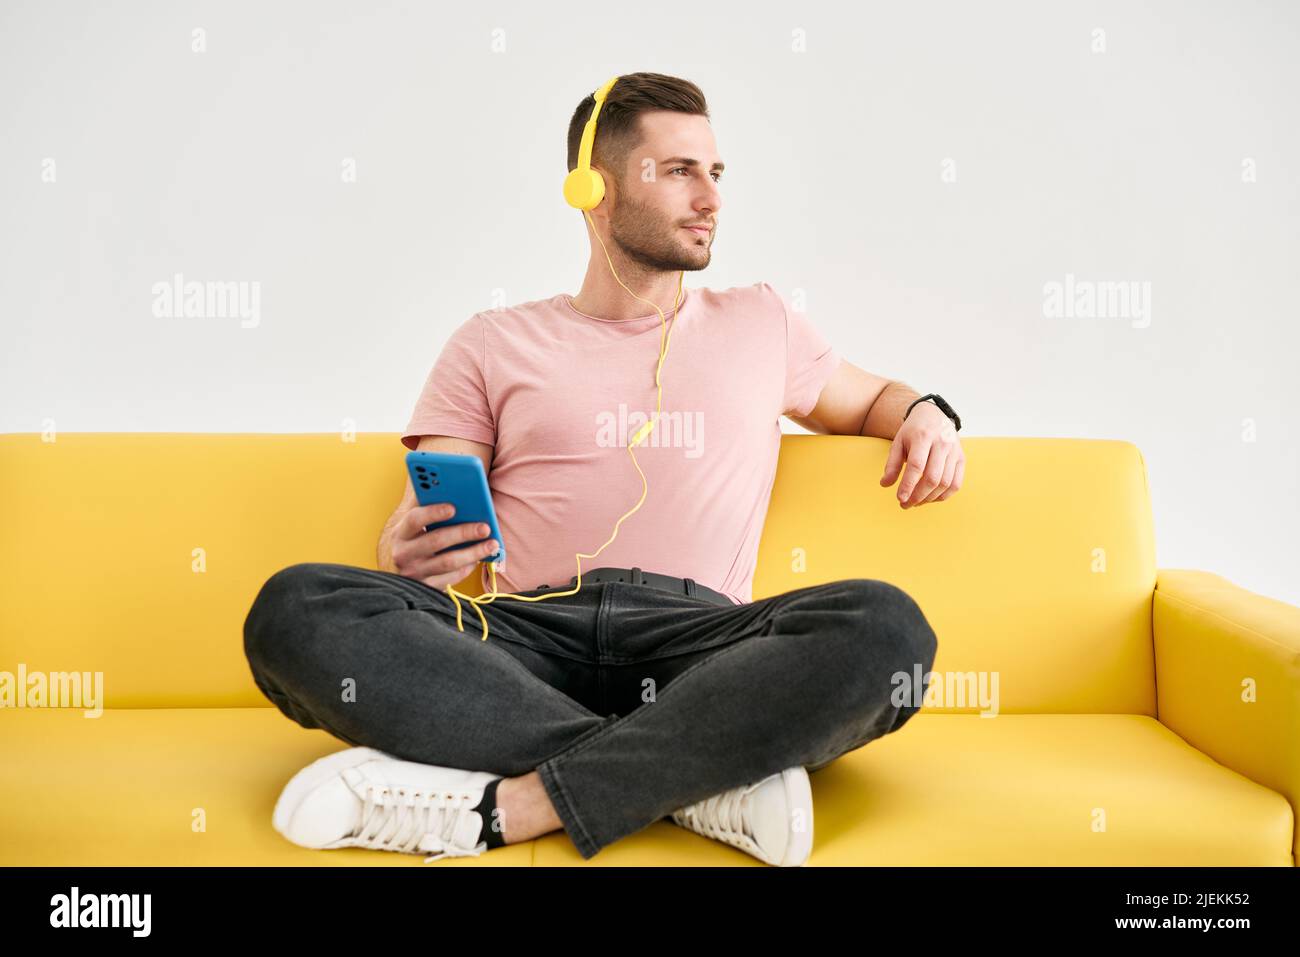 Relaxed young man wear headphones listen music by his mobile phone while sitting on yellow sofa over white background Stock Photo